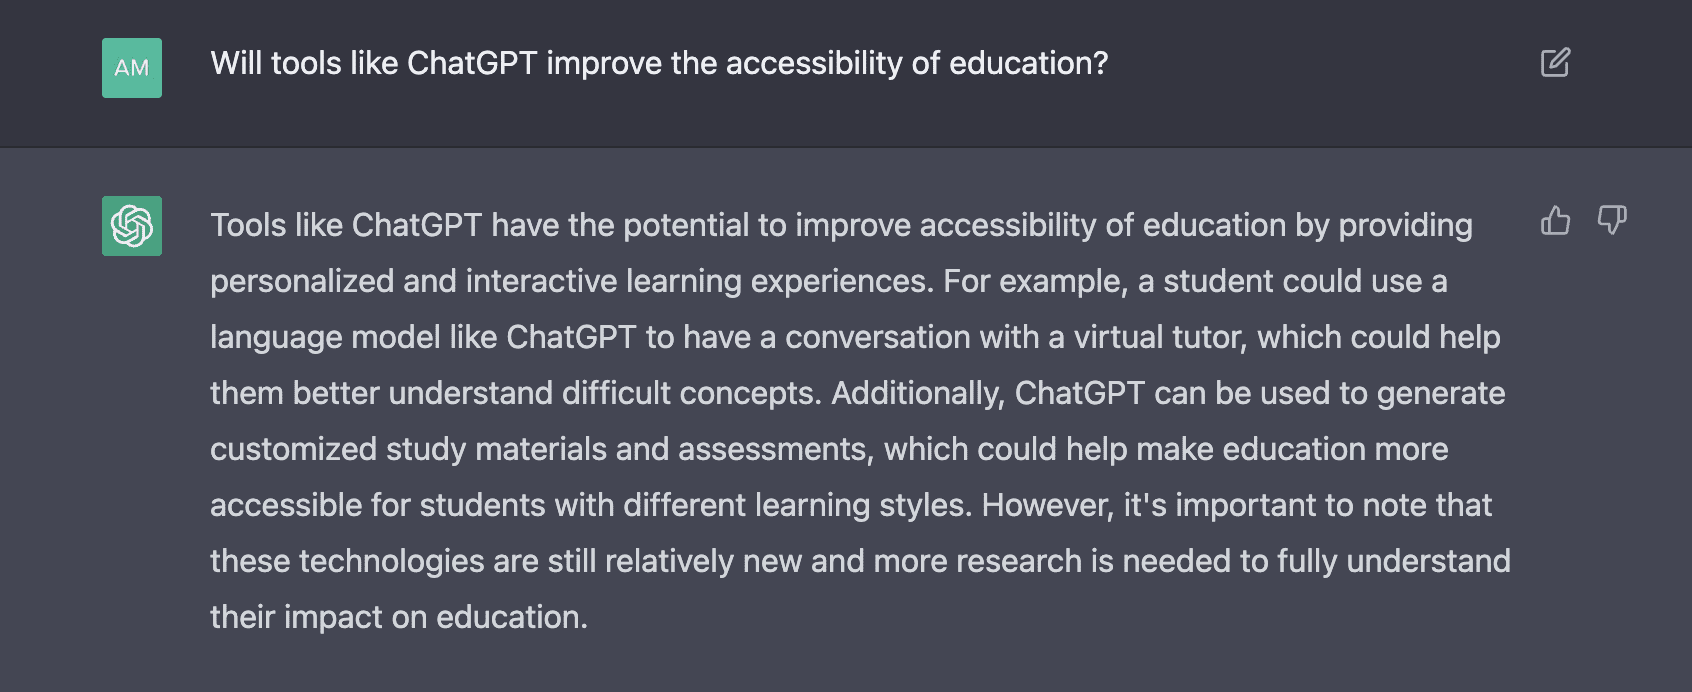 screenshot of chatgpt answering questions about ai in education and accessibility